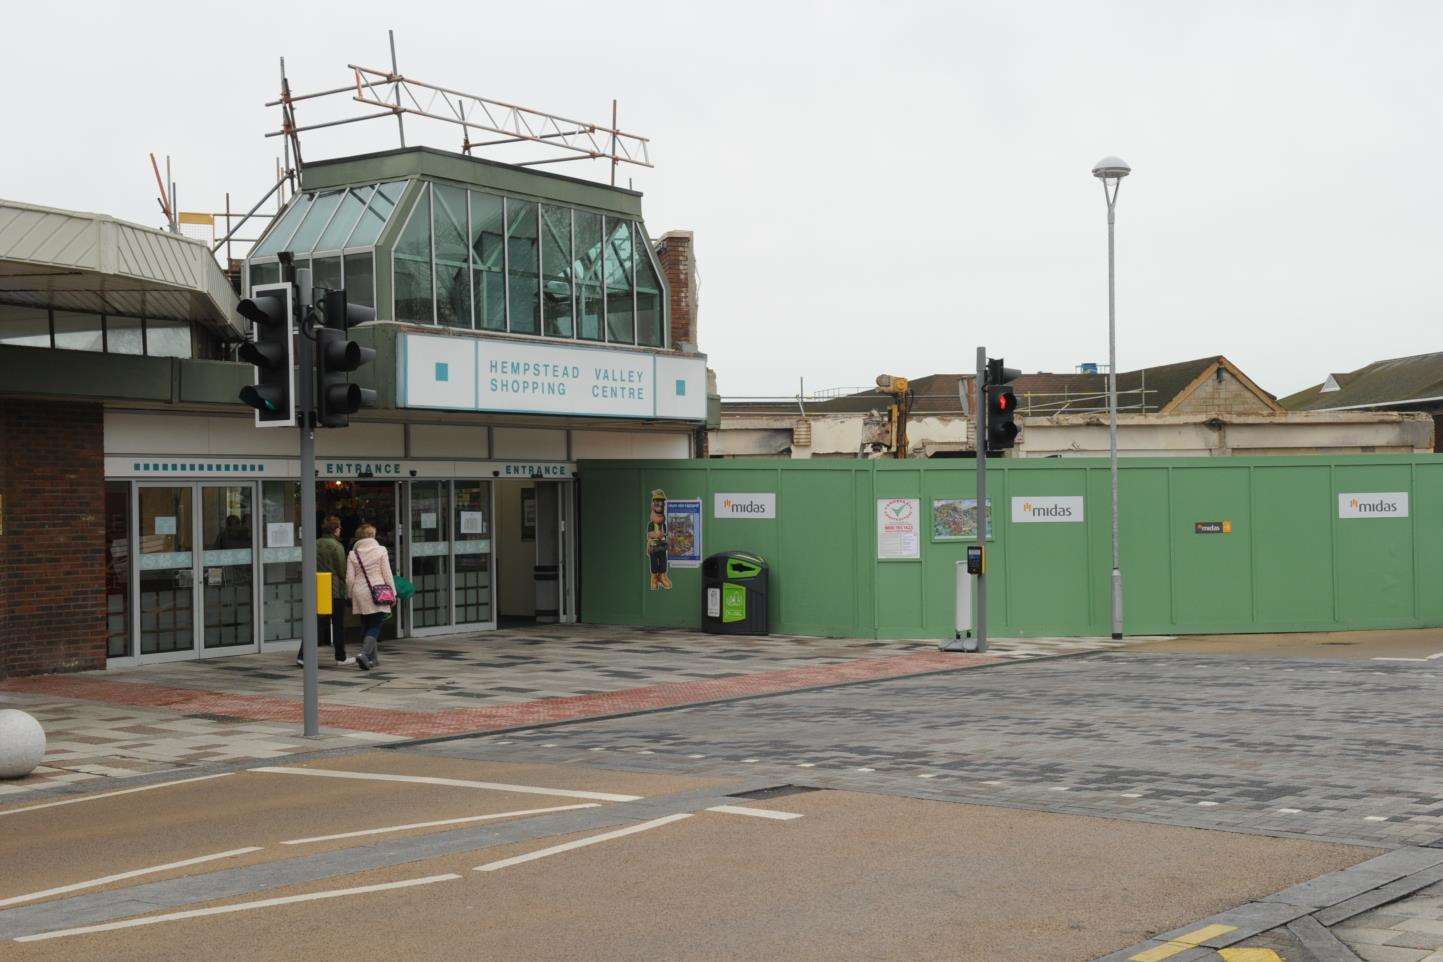 Work on the new extension at Hempstead Valley Shopping Centre